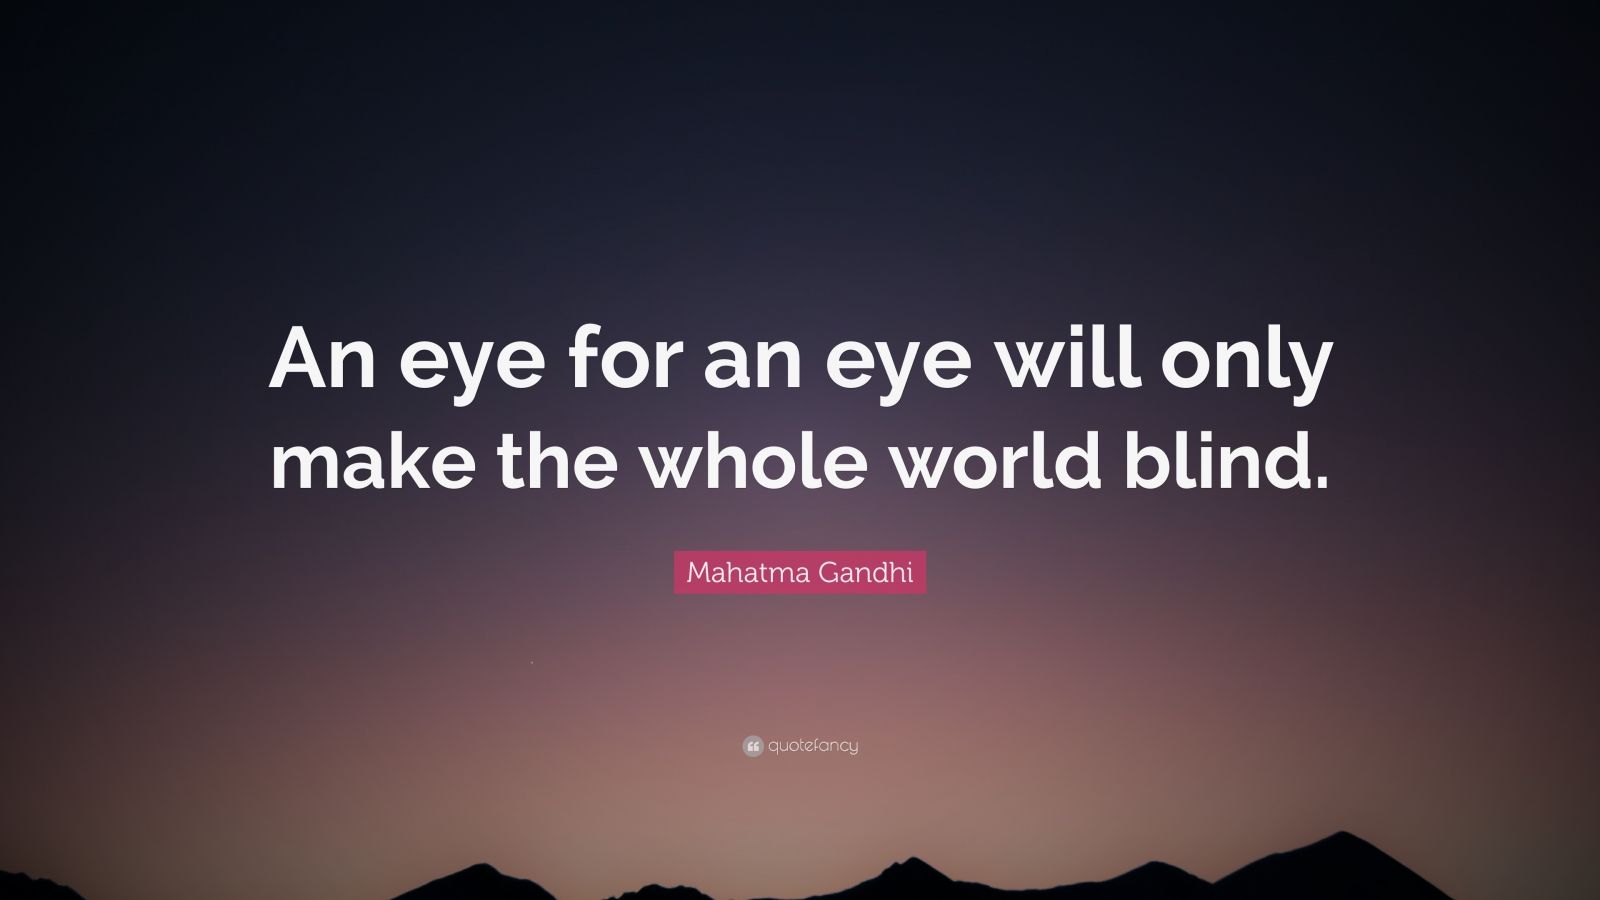 “An eye for an eye will only make the whole world blind.”